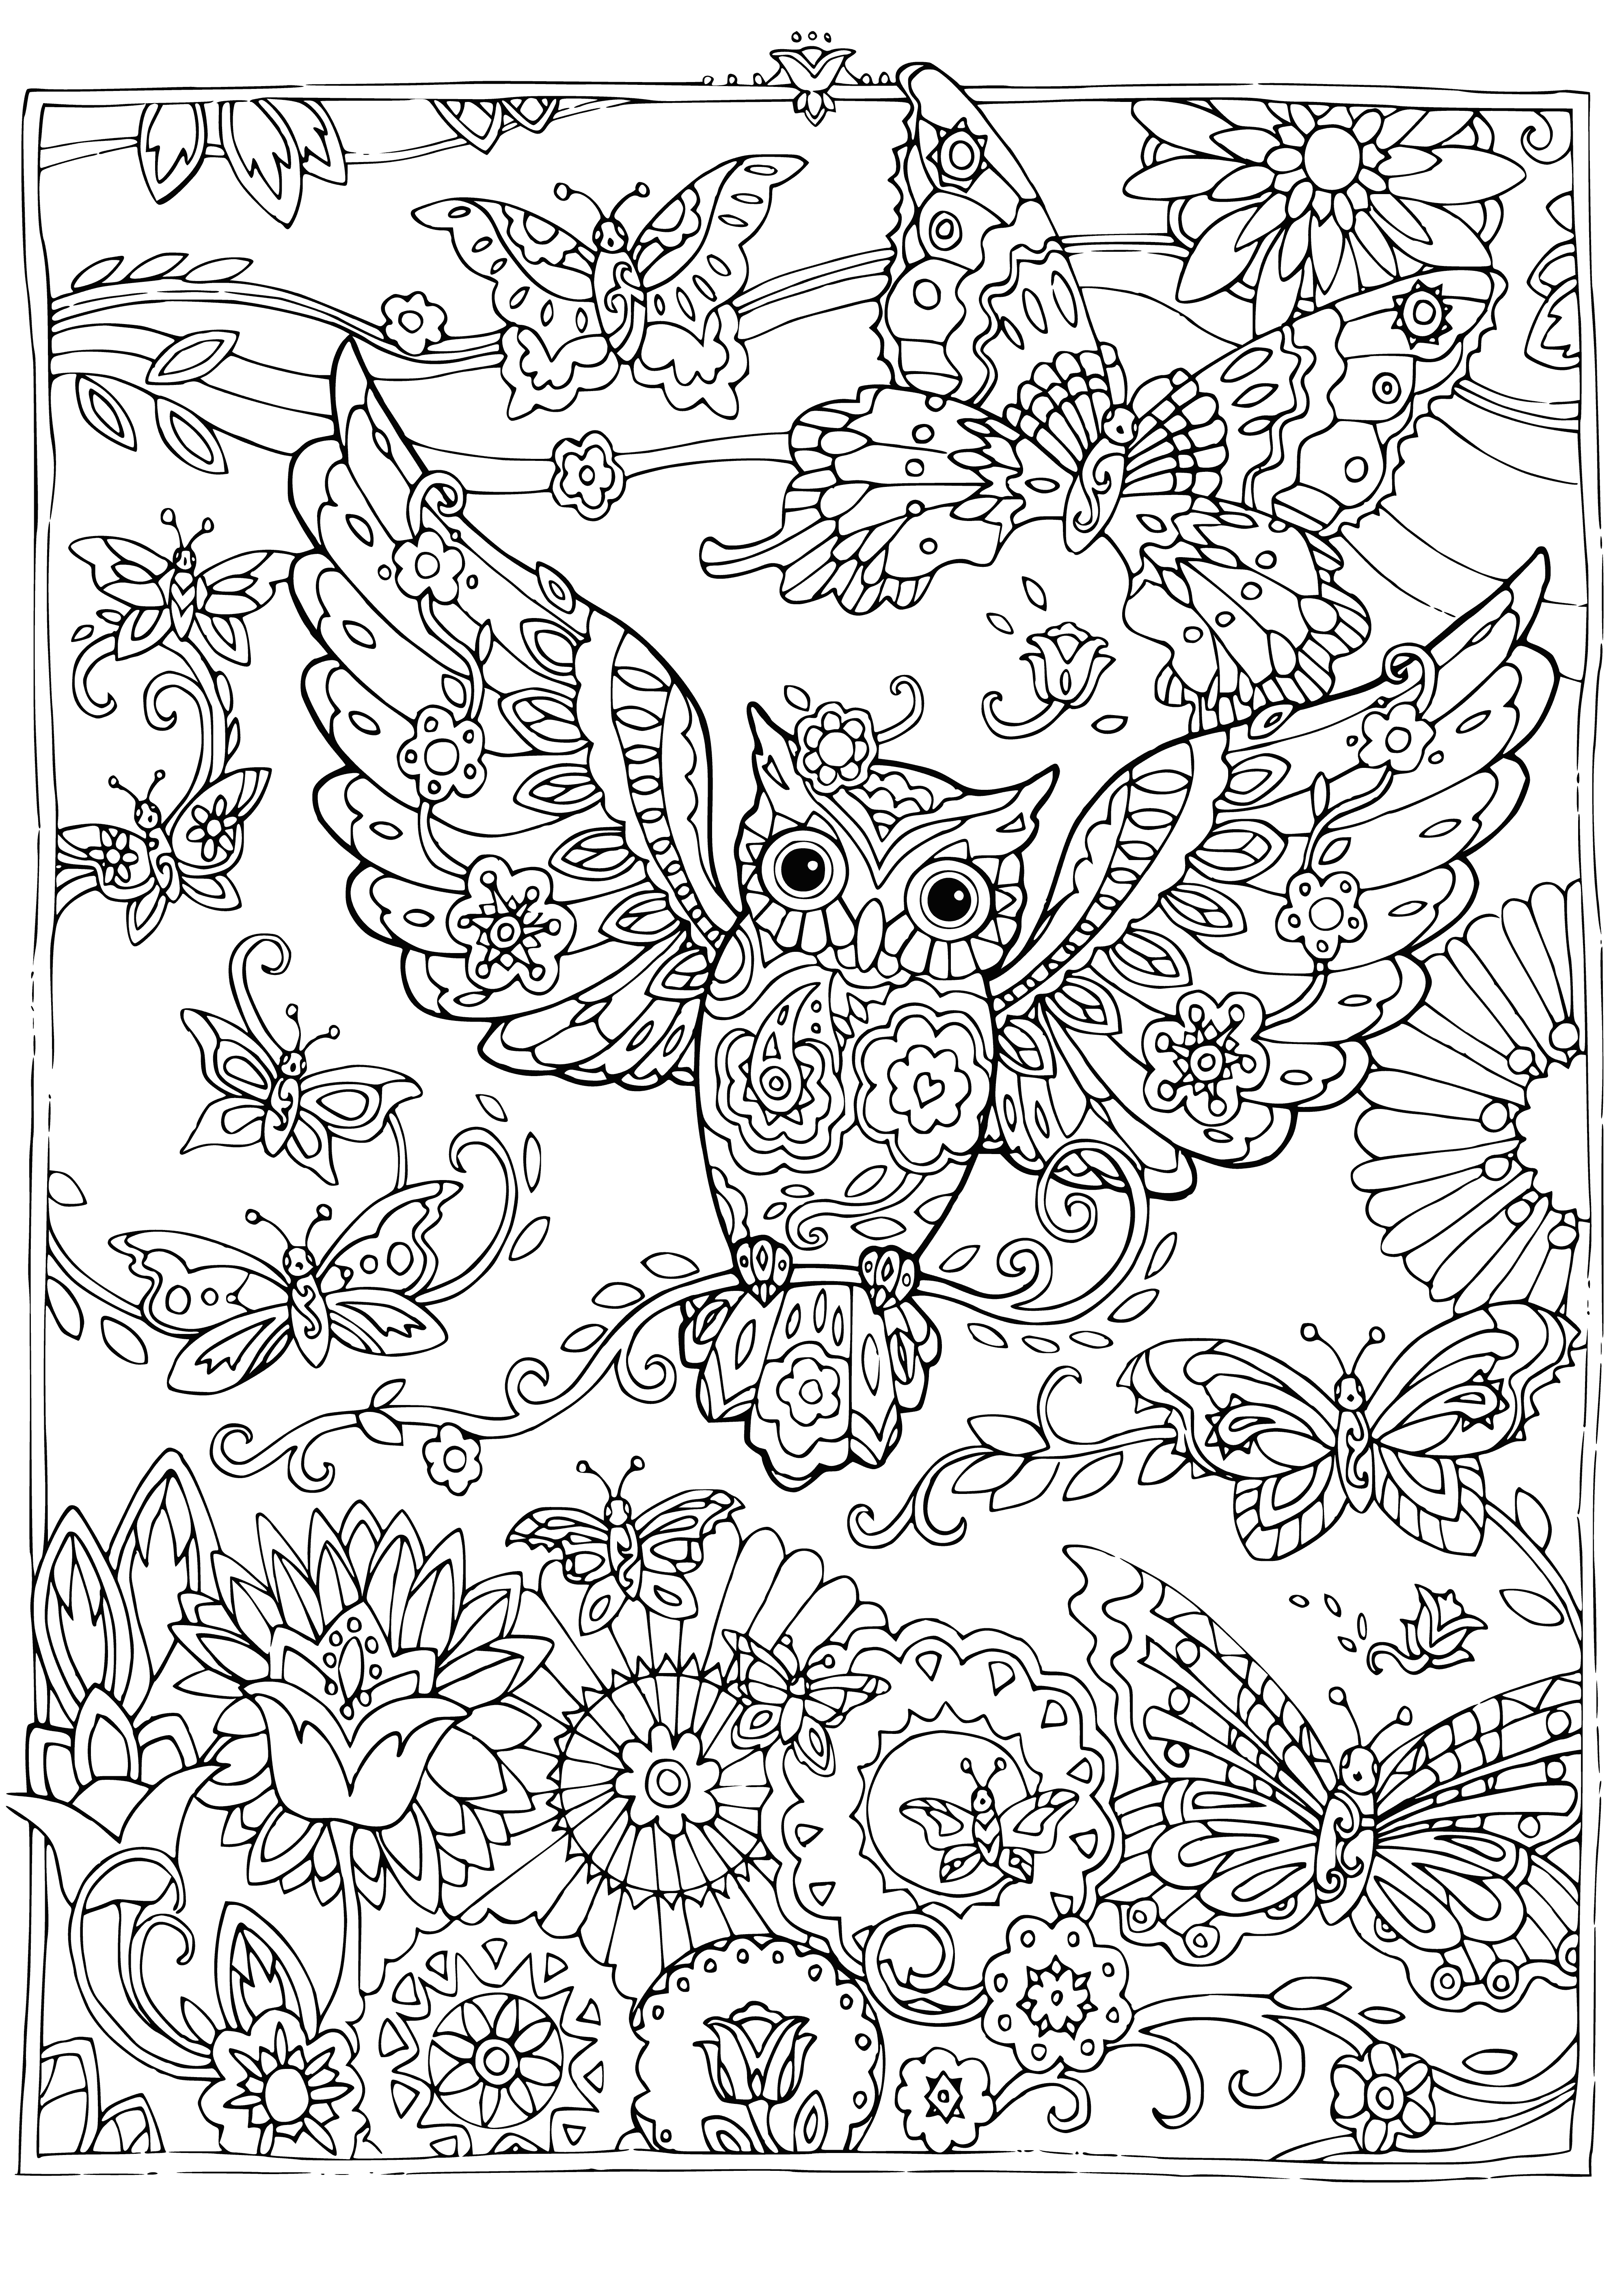 coloring page: Butterfly and owl rest calmly on branch together - one orange/black, one brown/white, both with big eyes.